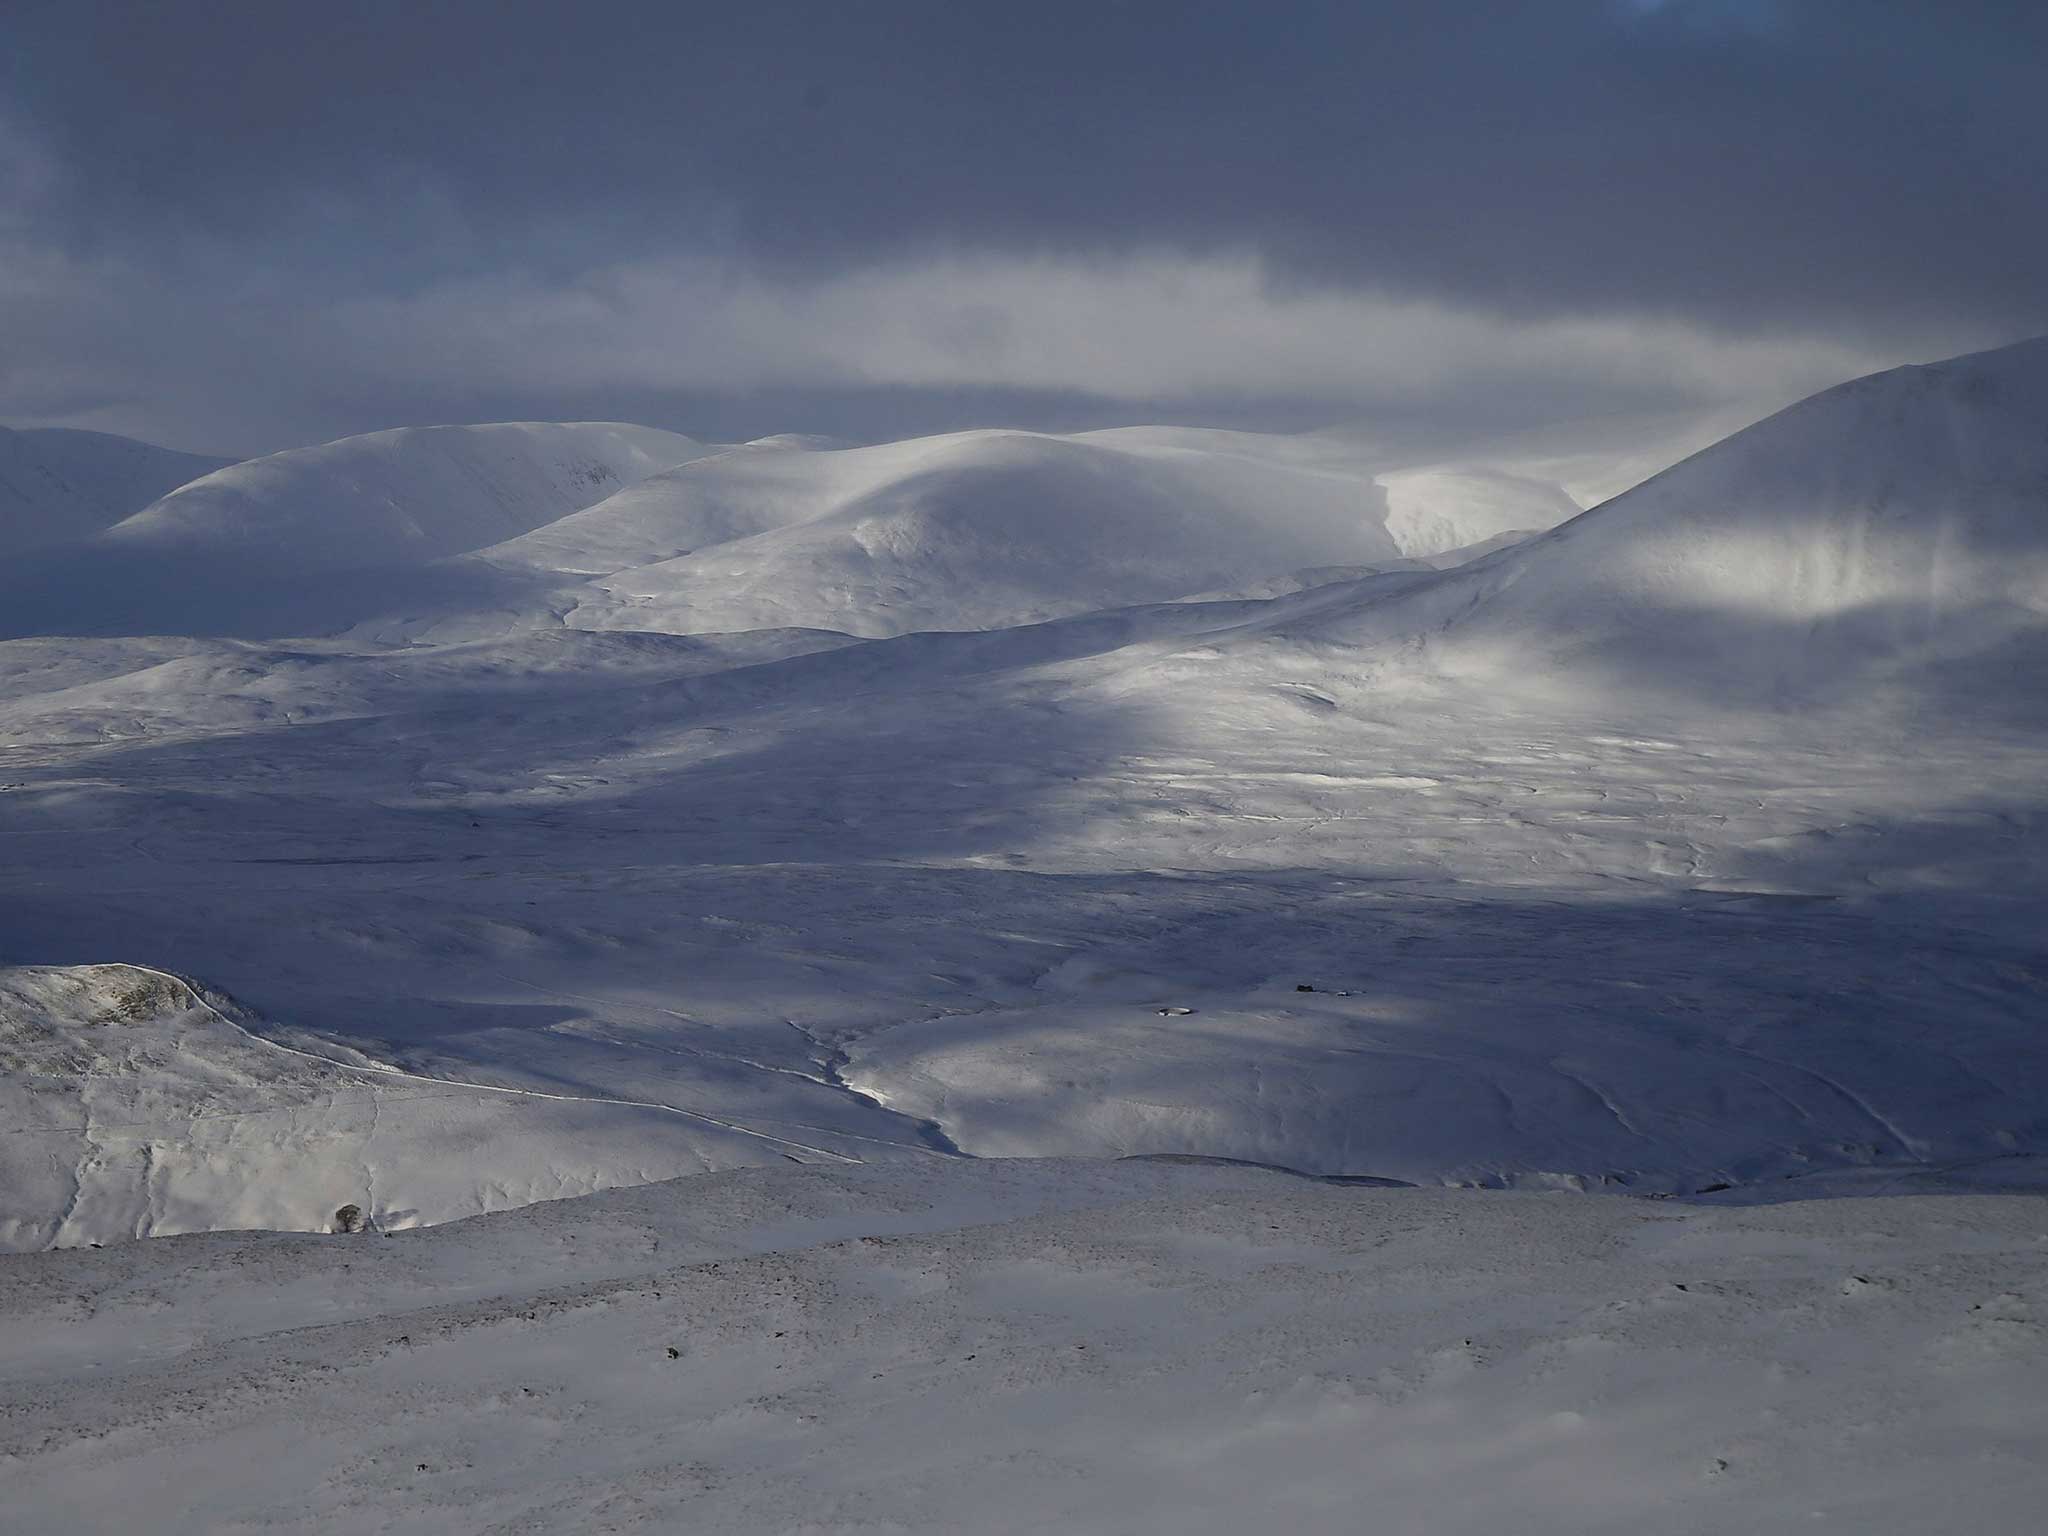 Snow covers the Scottish highlands